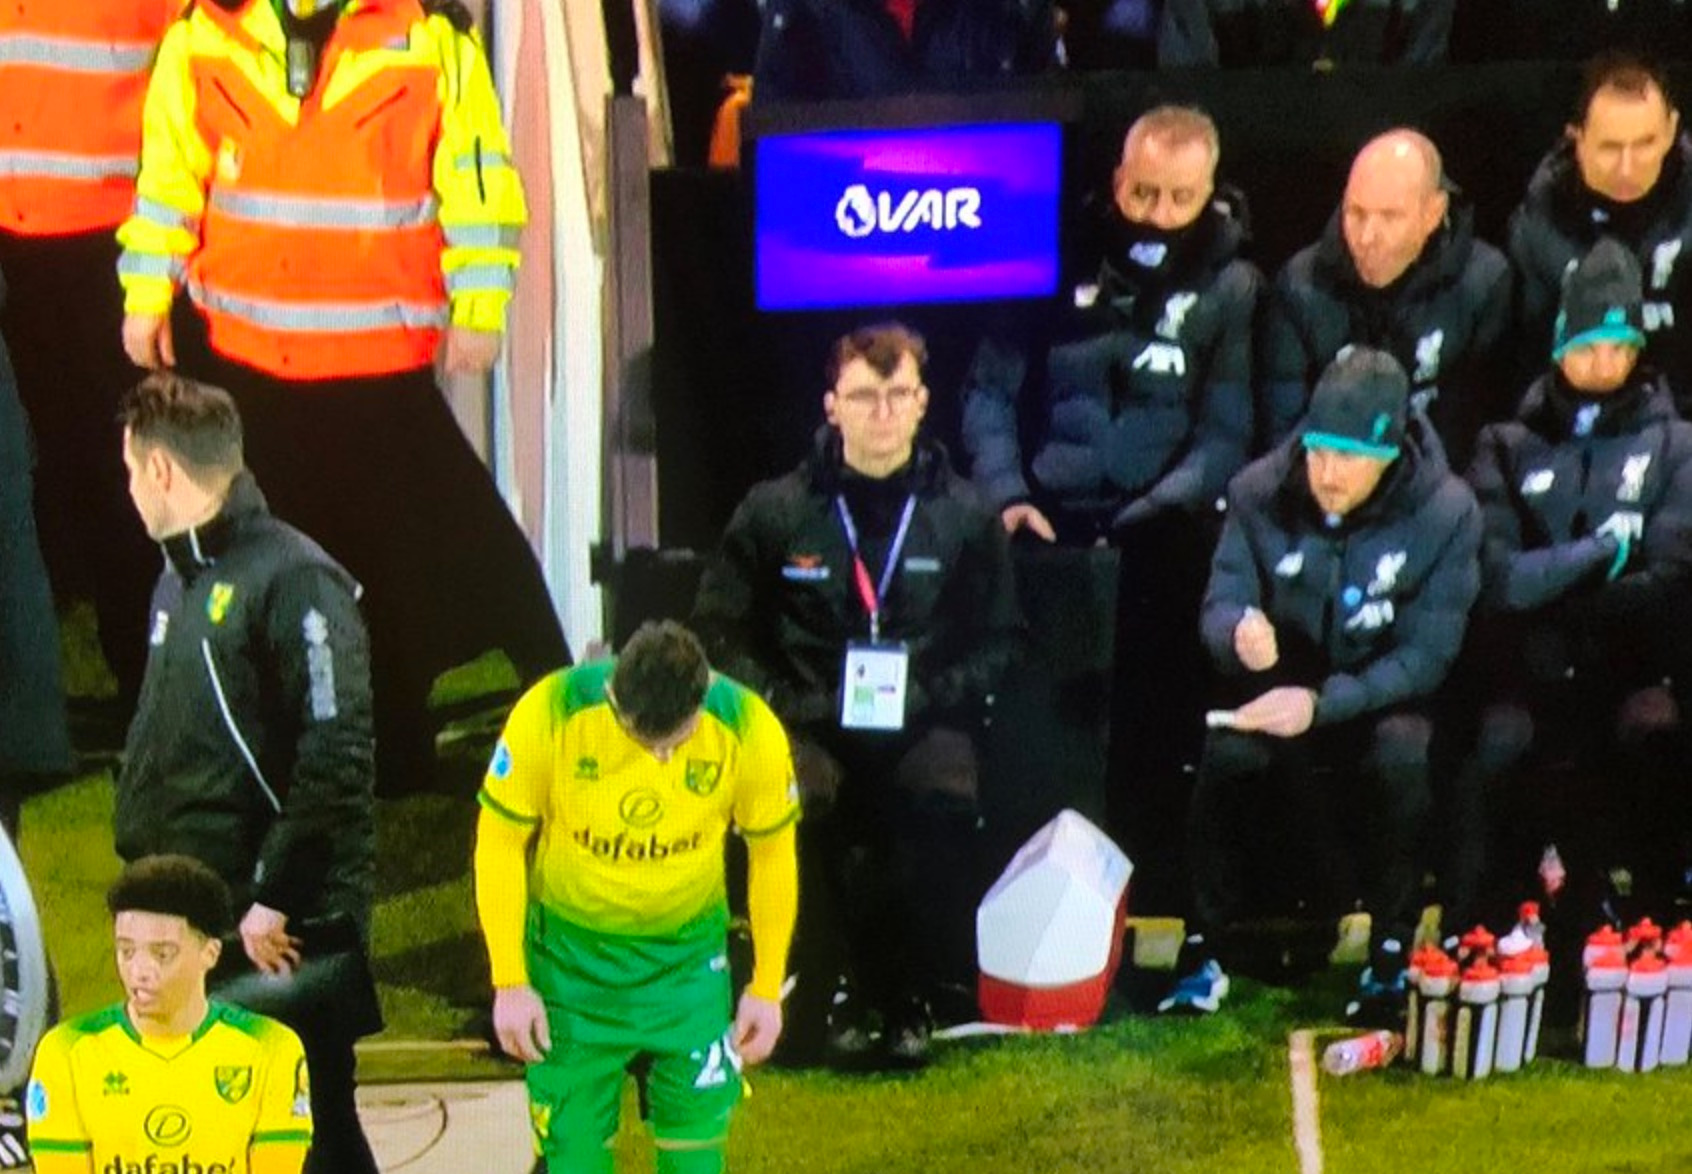 Football fans react as VAR monitor appears on Liverpool bench during Norwich win